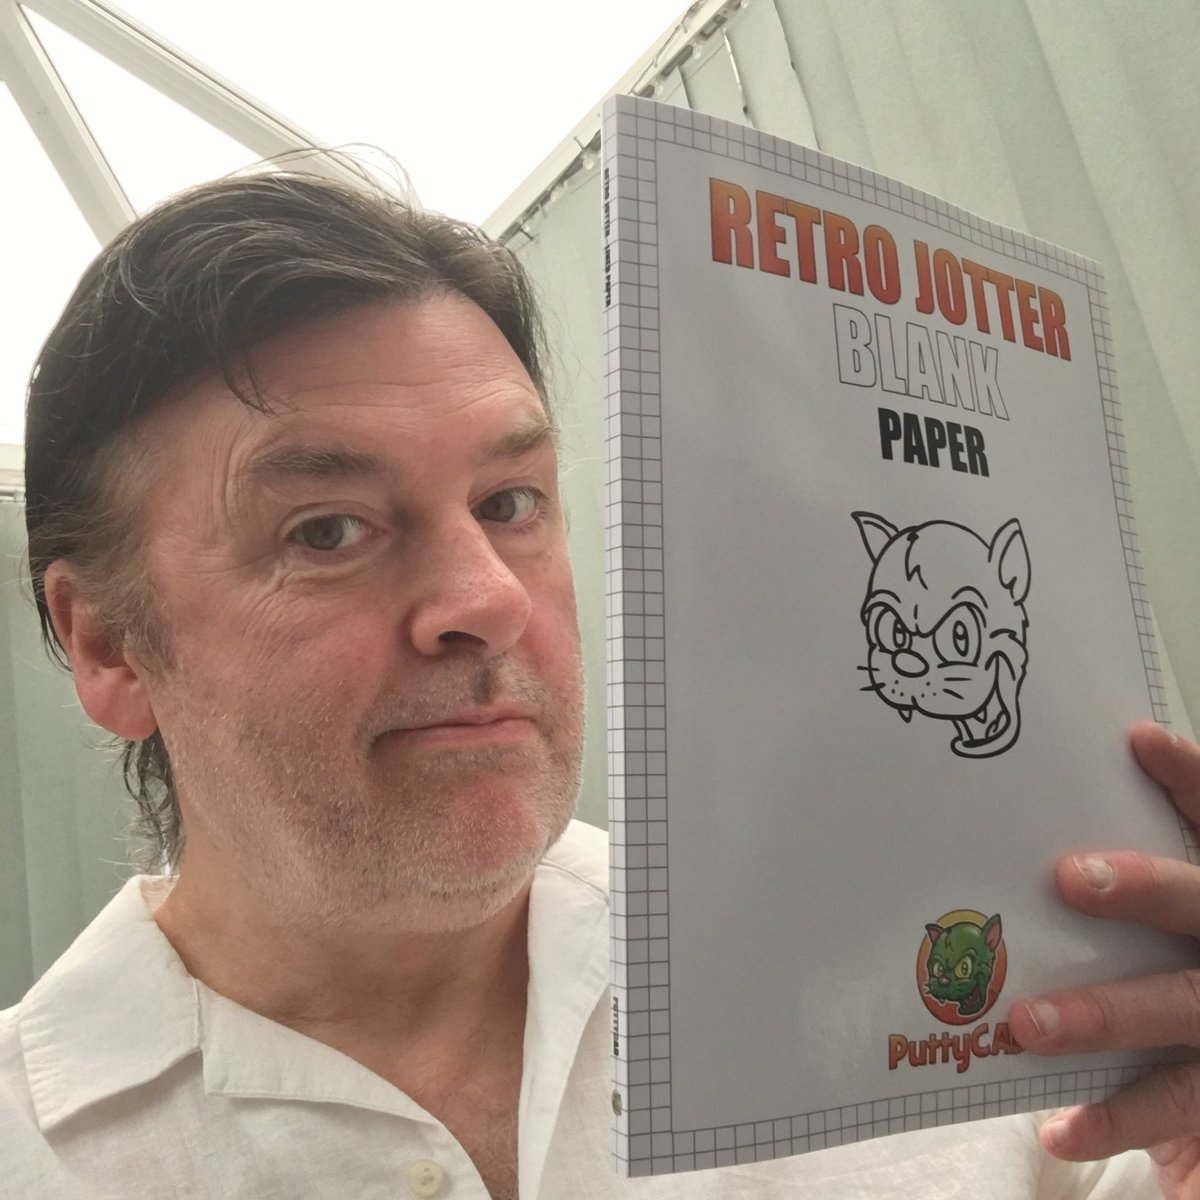 New drawing book! #retrojotter fun blank paper with a border. Ready for doodles and shizzle! #gamedev #indiedev #cartooning #illustration #drawing #art #illustrator #design #notepad #drawingpad available on all good Amazon stores worldwide. #shamelessplug #puttycad #ad